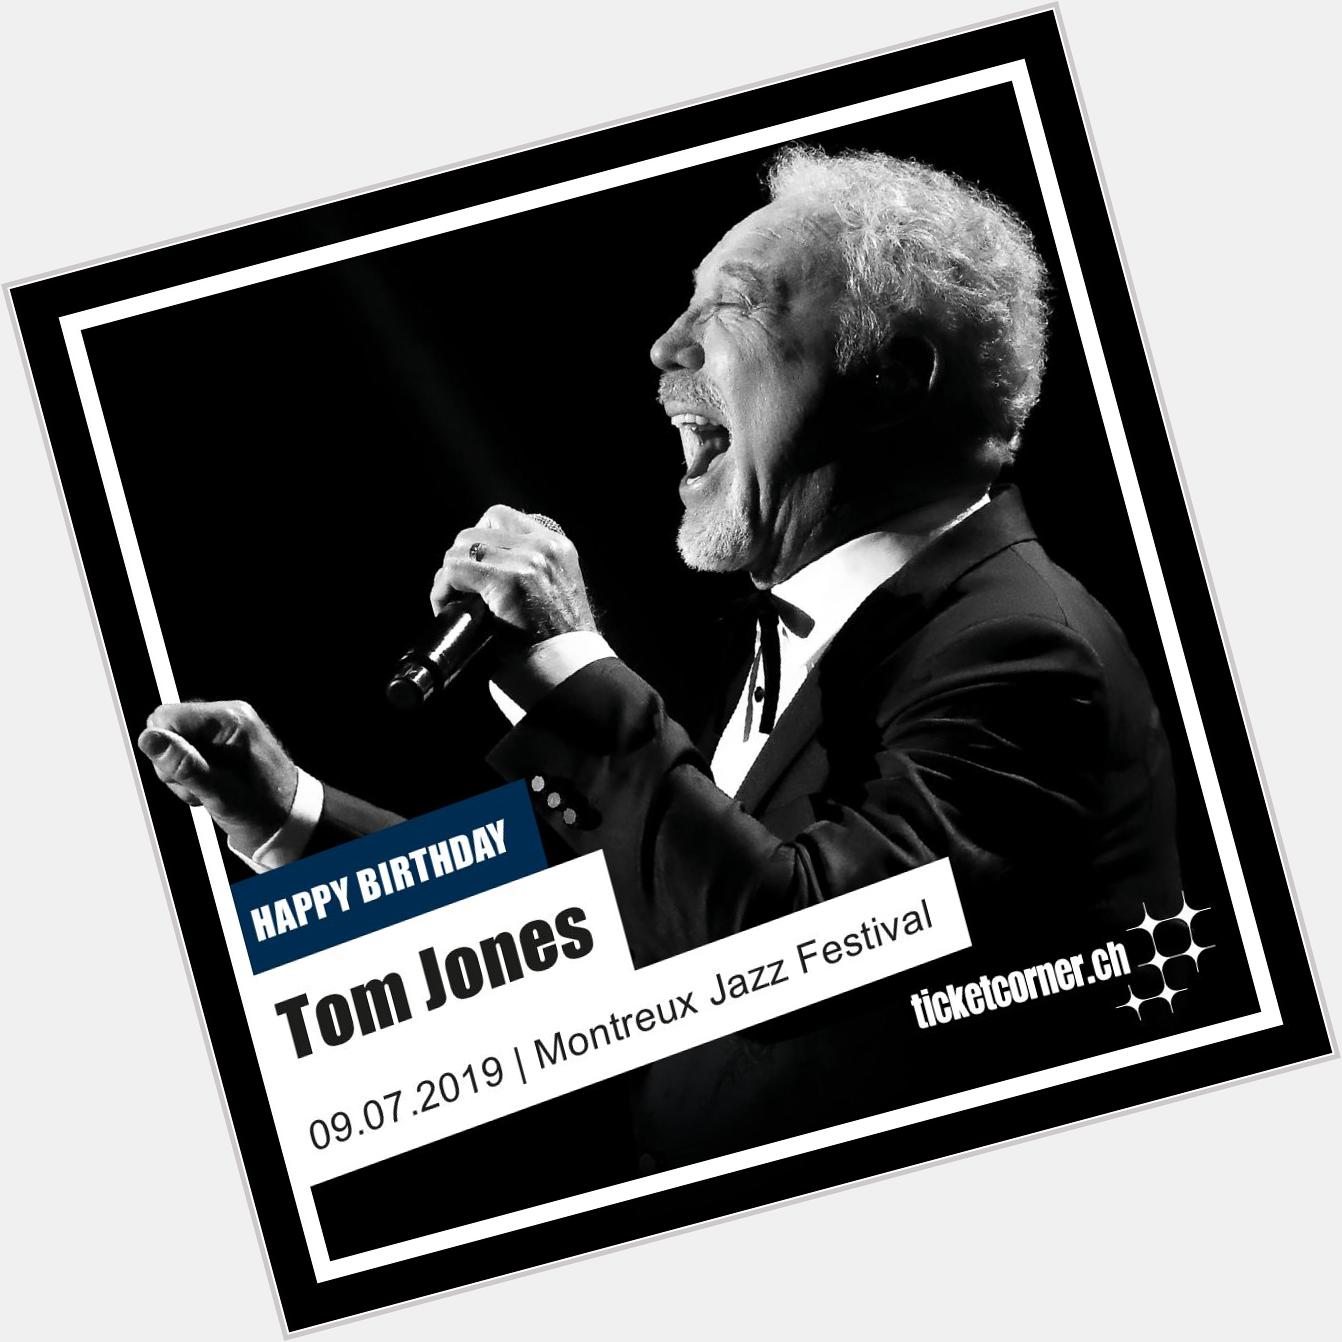 We you Tom Jones. Happy Birthday and see you in Montreux Jazz Festival  